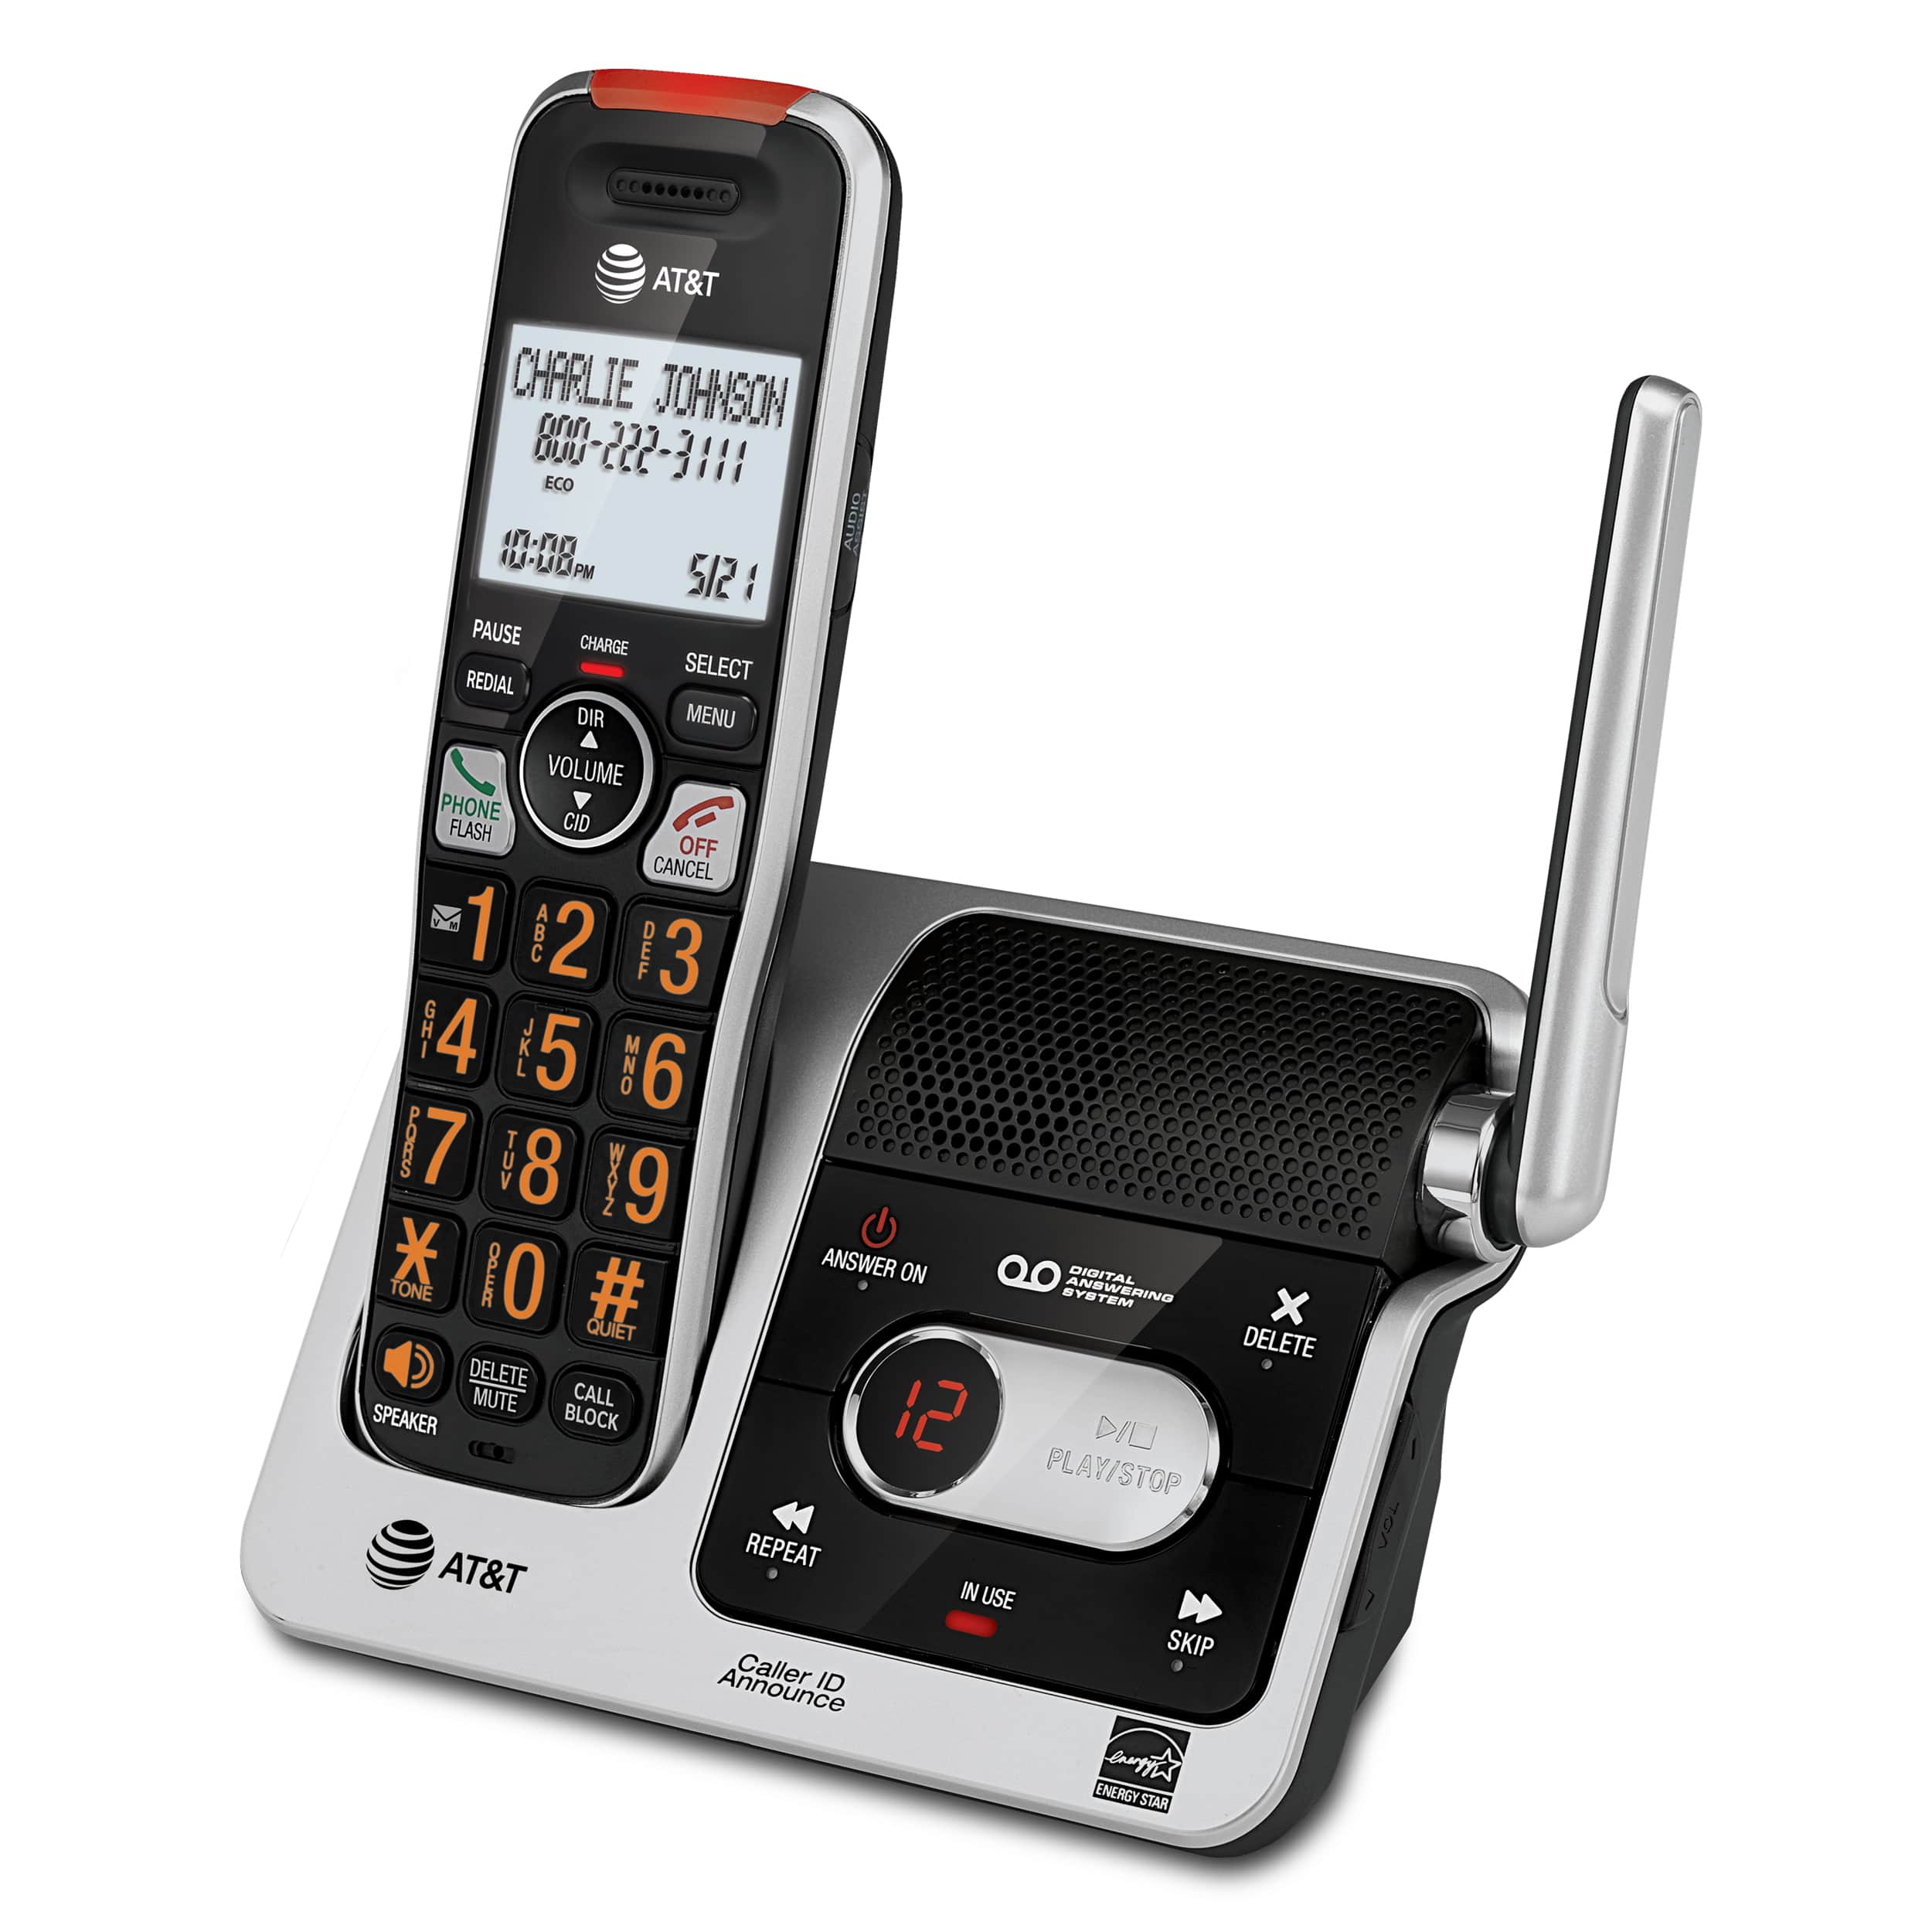 Cordless Phone with Unsurpassed Range, Smart Call Blocker and Answering System - view 8